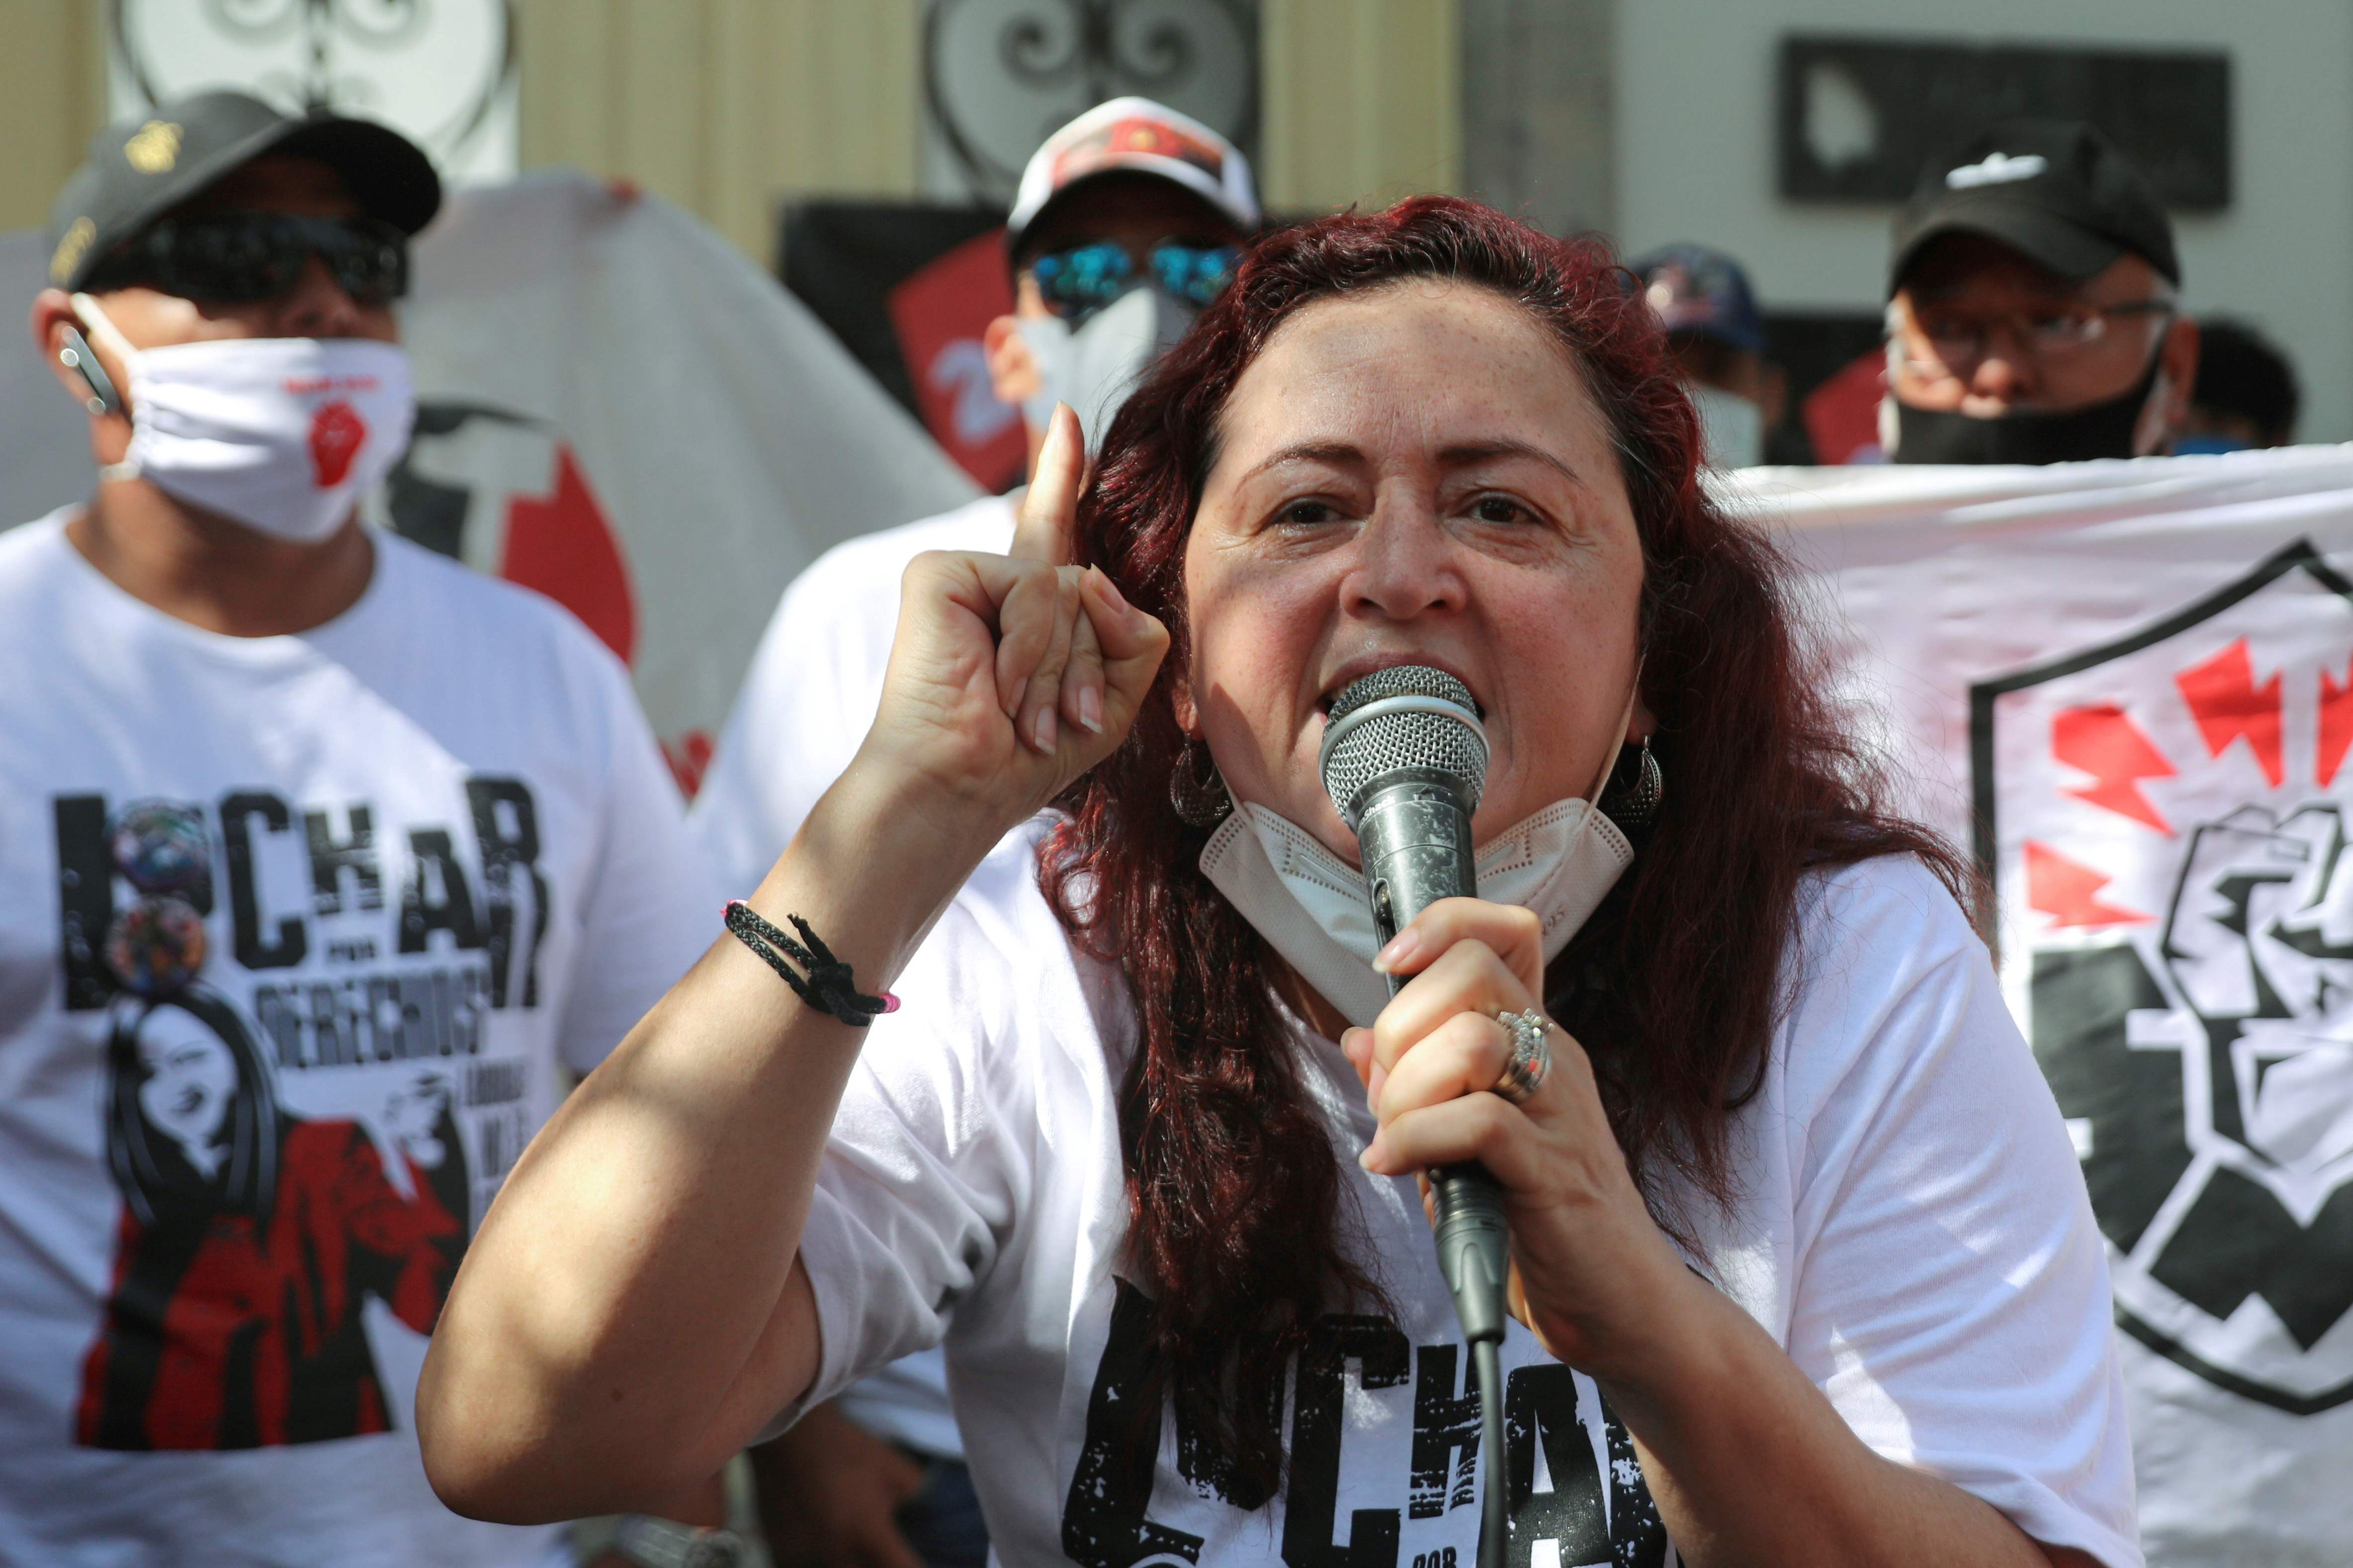 Mexican labor lawyer Susana Prieto leads a demonstration with supporters and workers outside an office of the Chihuahua state government in Mexico City